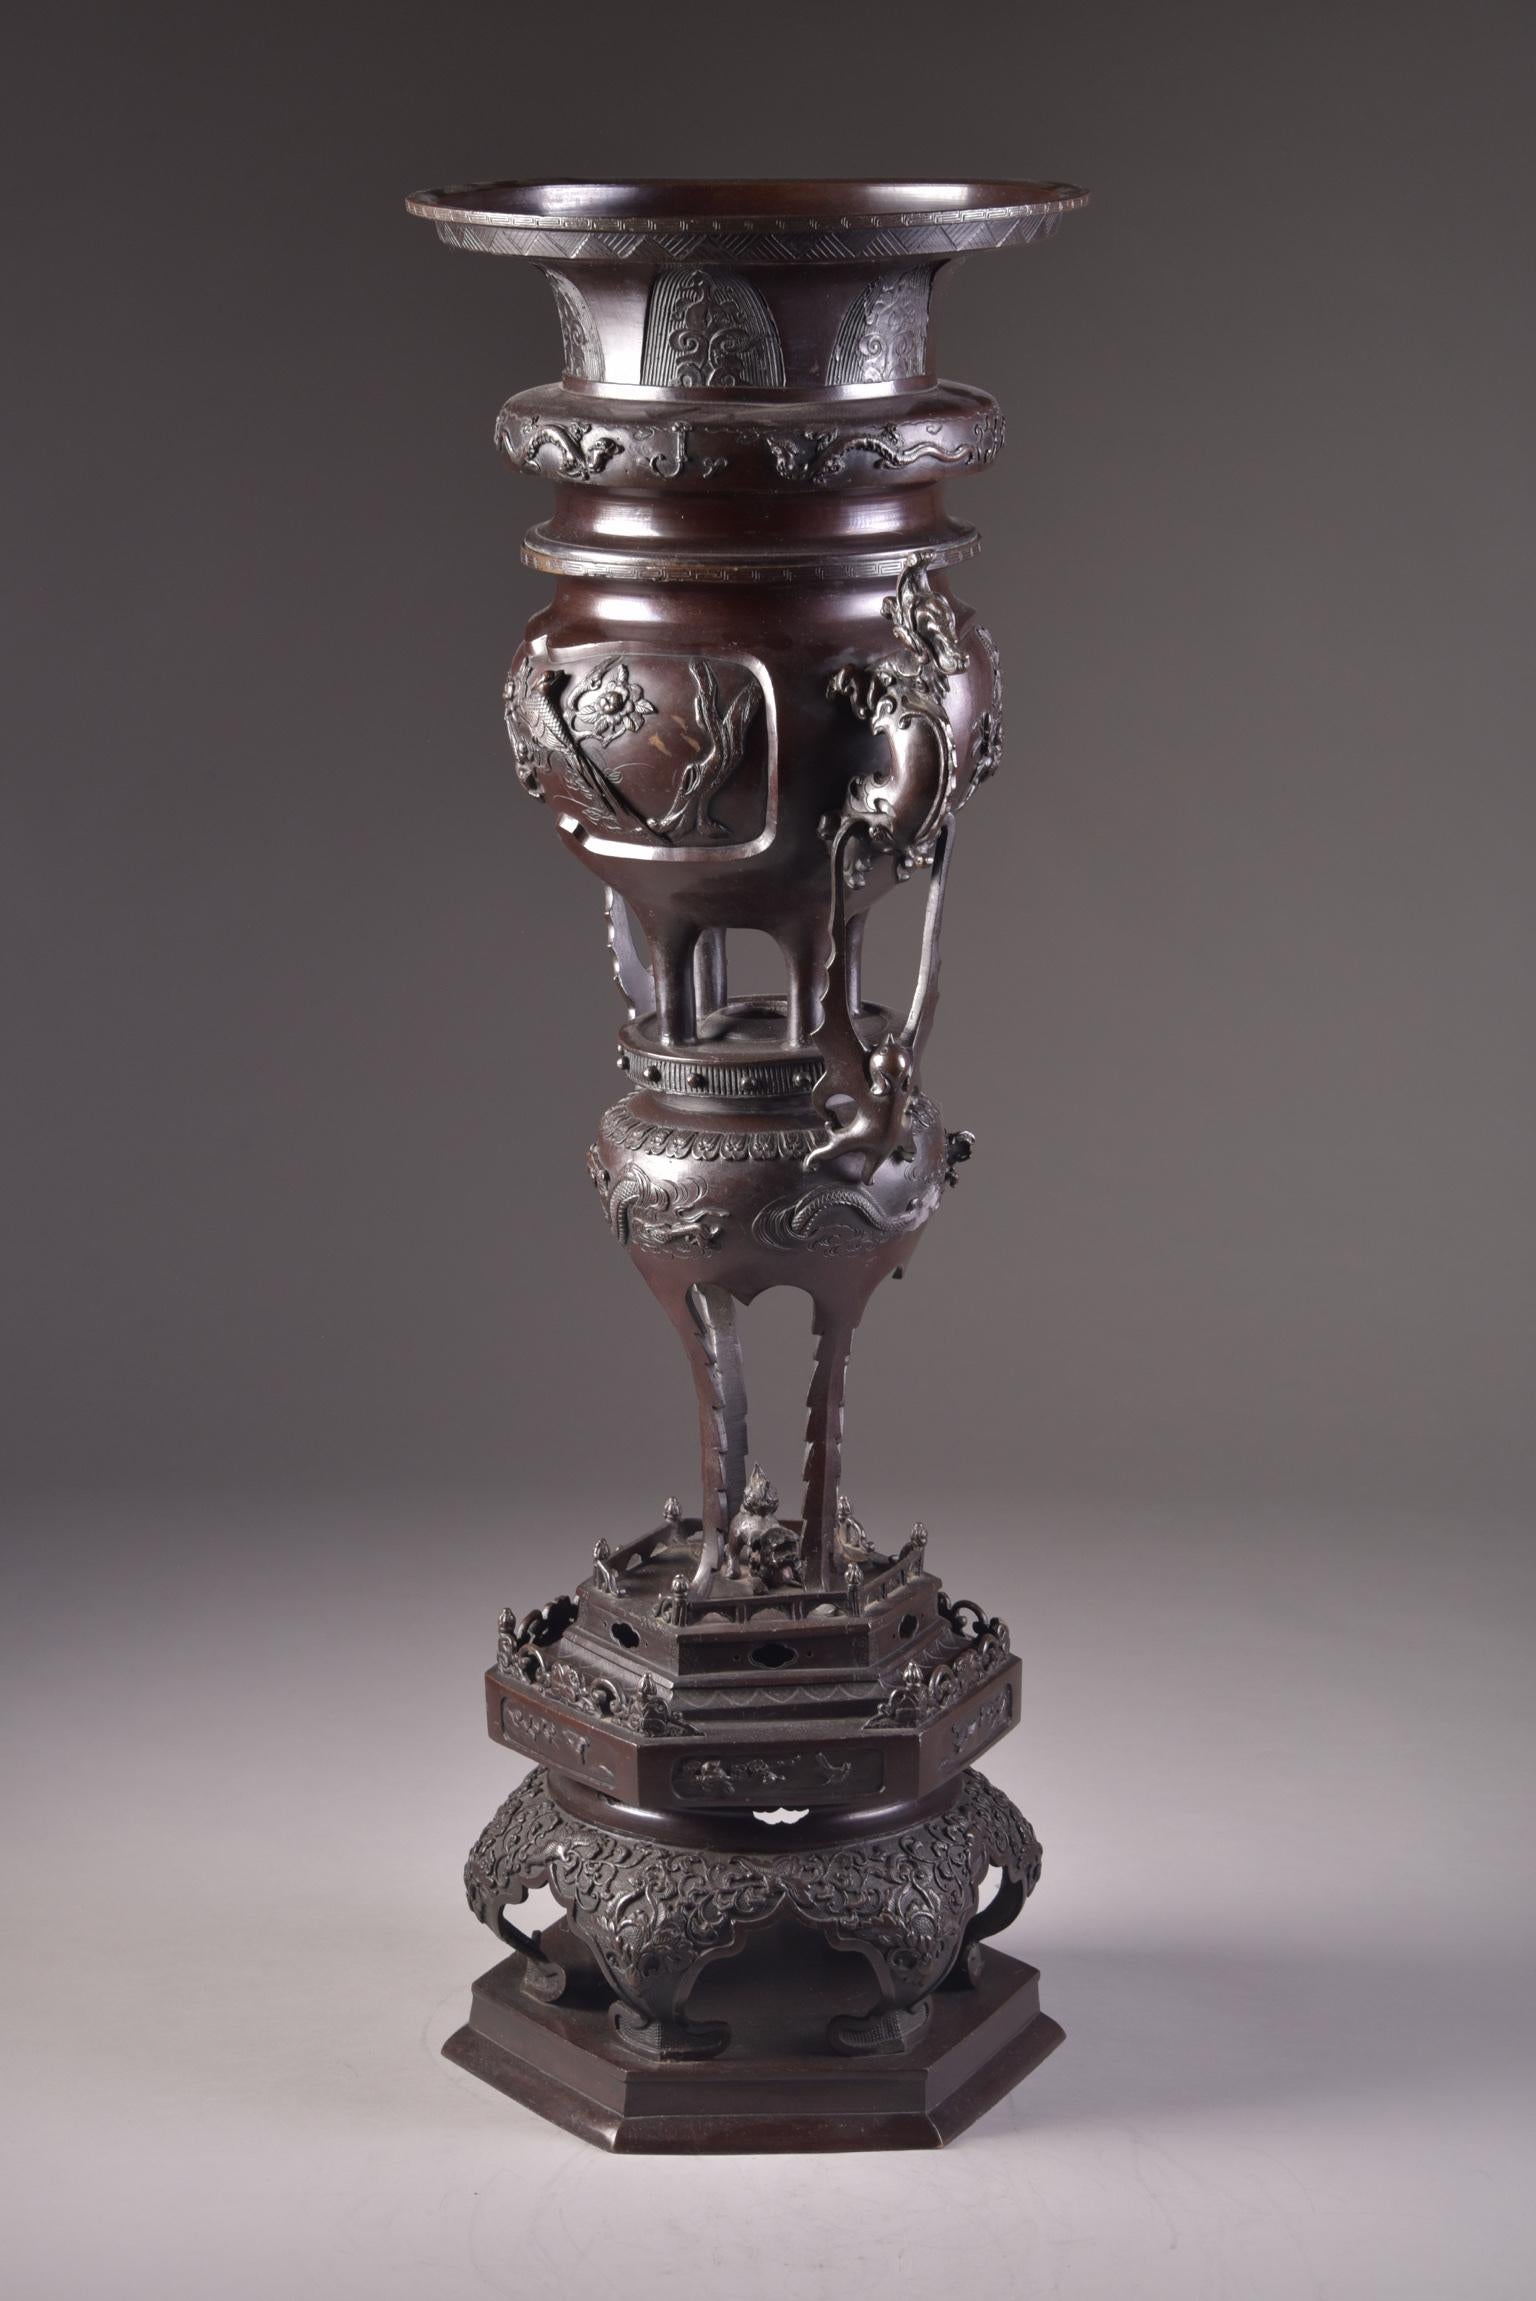 Imposing large Japanese bronze vase / urn with impressive images and various reliefs.
Japan, 1860-1900. 

   